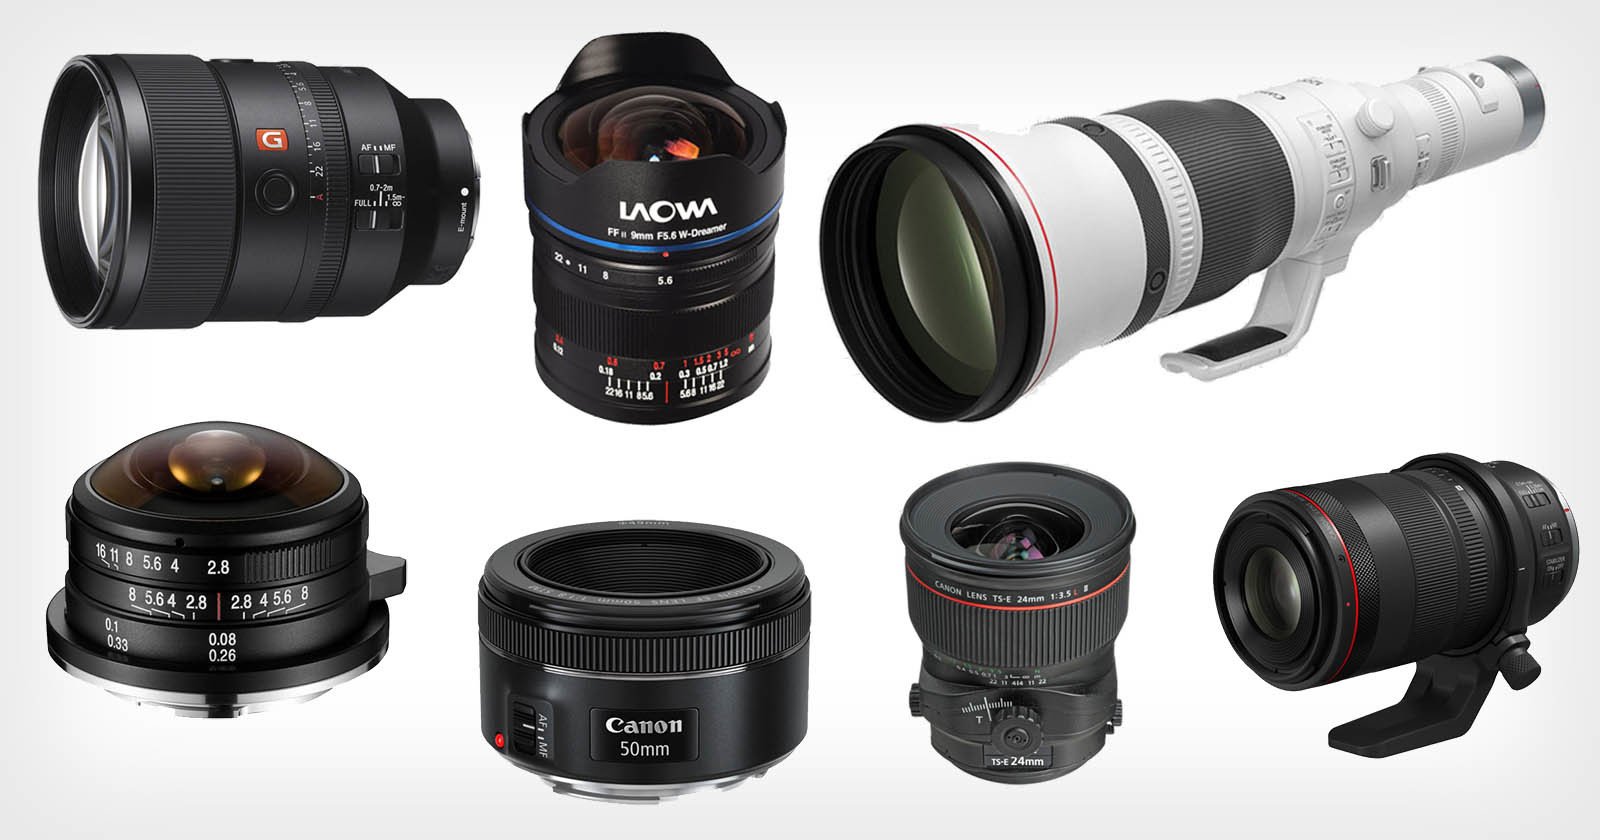  types camera lenses complete guide 